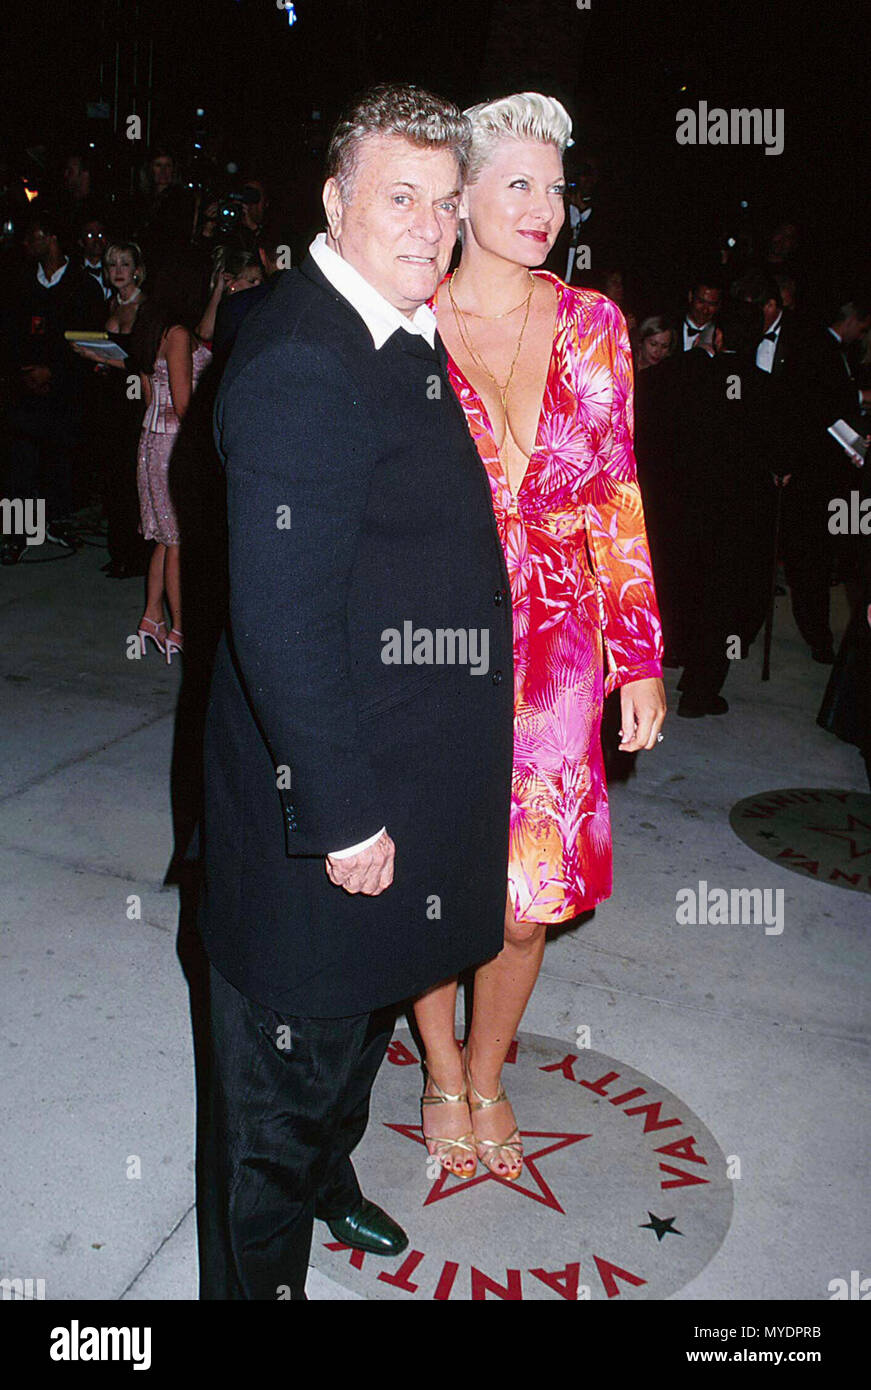 26 Mar 2000, Los Angeles, California, USA --- Tony Curtis with Wife Jill Vandenberg --- Image by © . / USATony Curtis with Wife Jill Vandenberg 2 Red Carpet Event, Vertical, USA, Film Industry, Celebrities,  Photography, Bestof, Arts Culture and Entertainment, Topix Celebrities fashion /  Vertical, Best of, Event in Hollywood Life - California,  Red Carpet and backstage, USA, Film Industry, Celebrities,  movie celebrities, TV celebrities, Music celebrities, Photography, Bestof, Arts Culture and Entertainment,  Topix,  vertical,, inquiry tsuni@Gamma-USA.com,   celebrity with family member ( hus Stock Photo